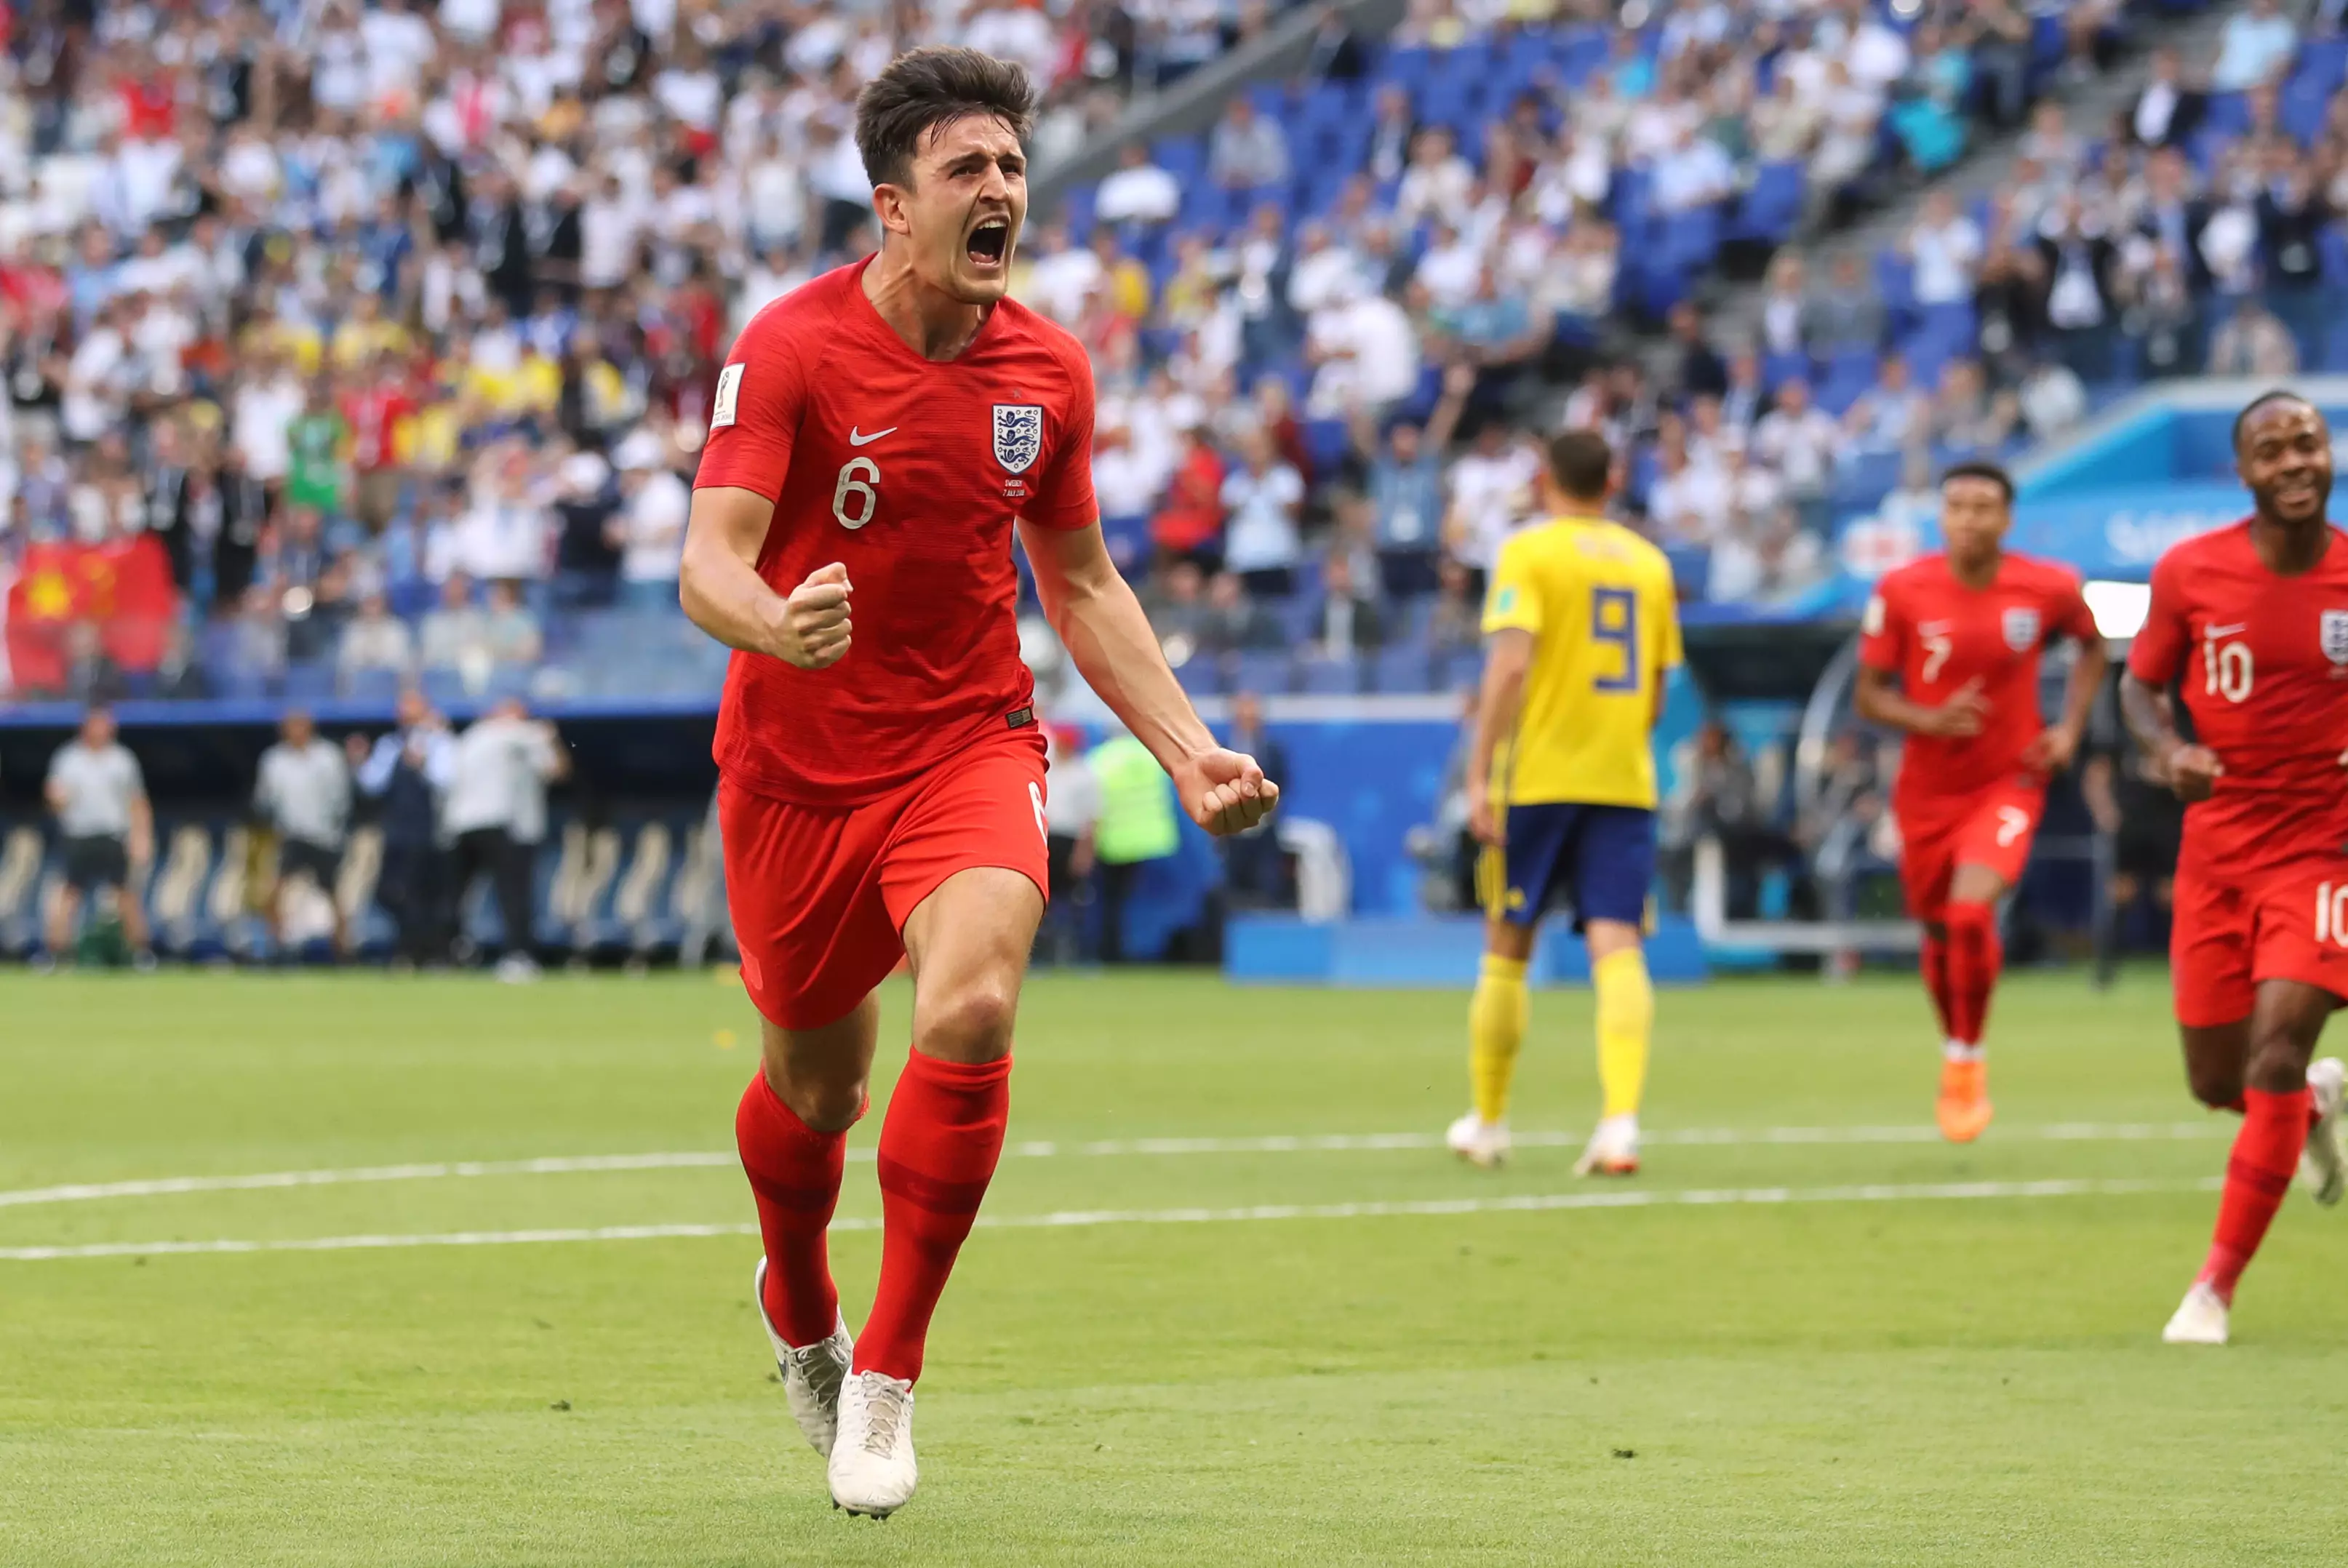 Maguire became a hero for England last summer. Image: PA